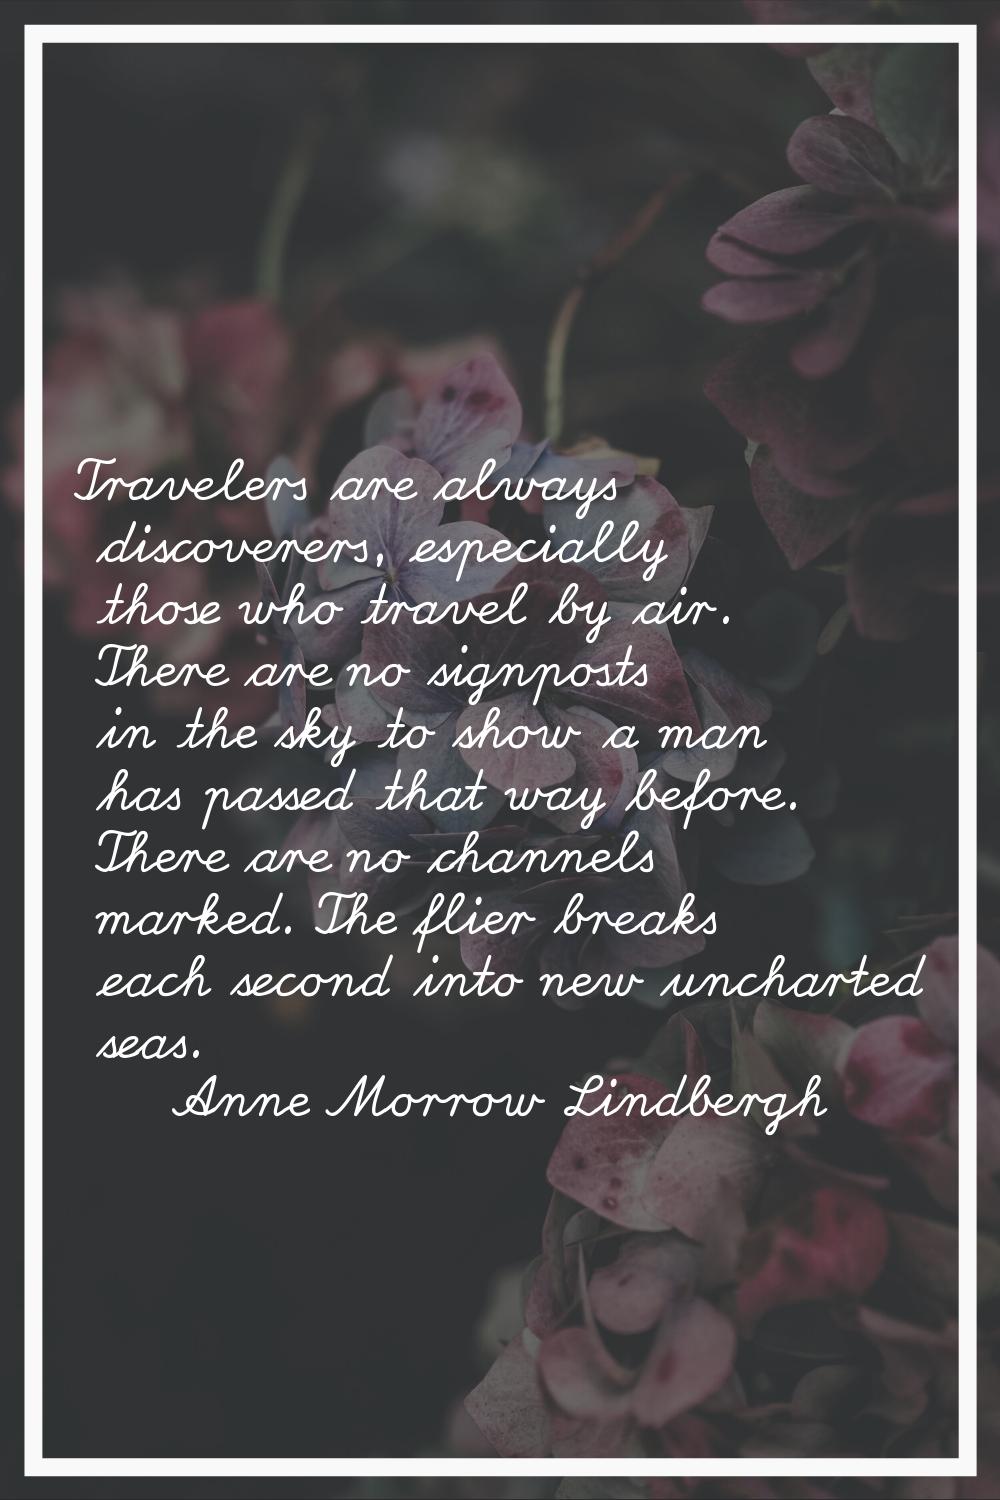 Travelers are always discoverers, especially those who travel by air. There are no signposts in the